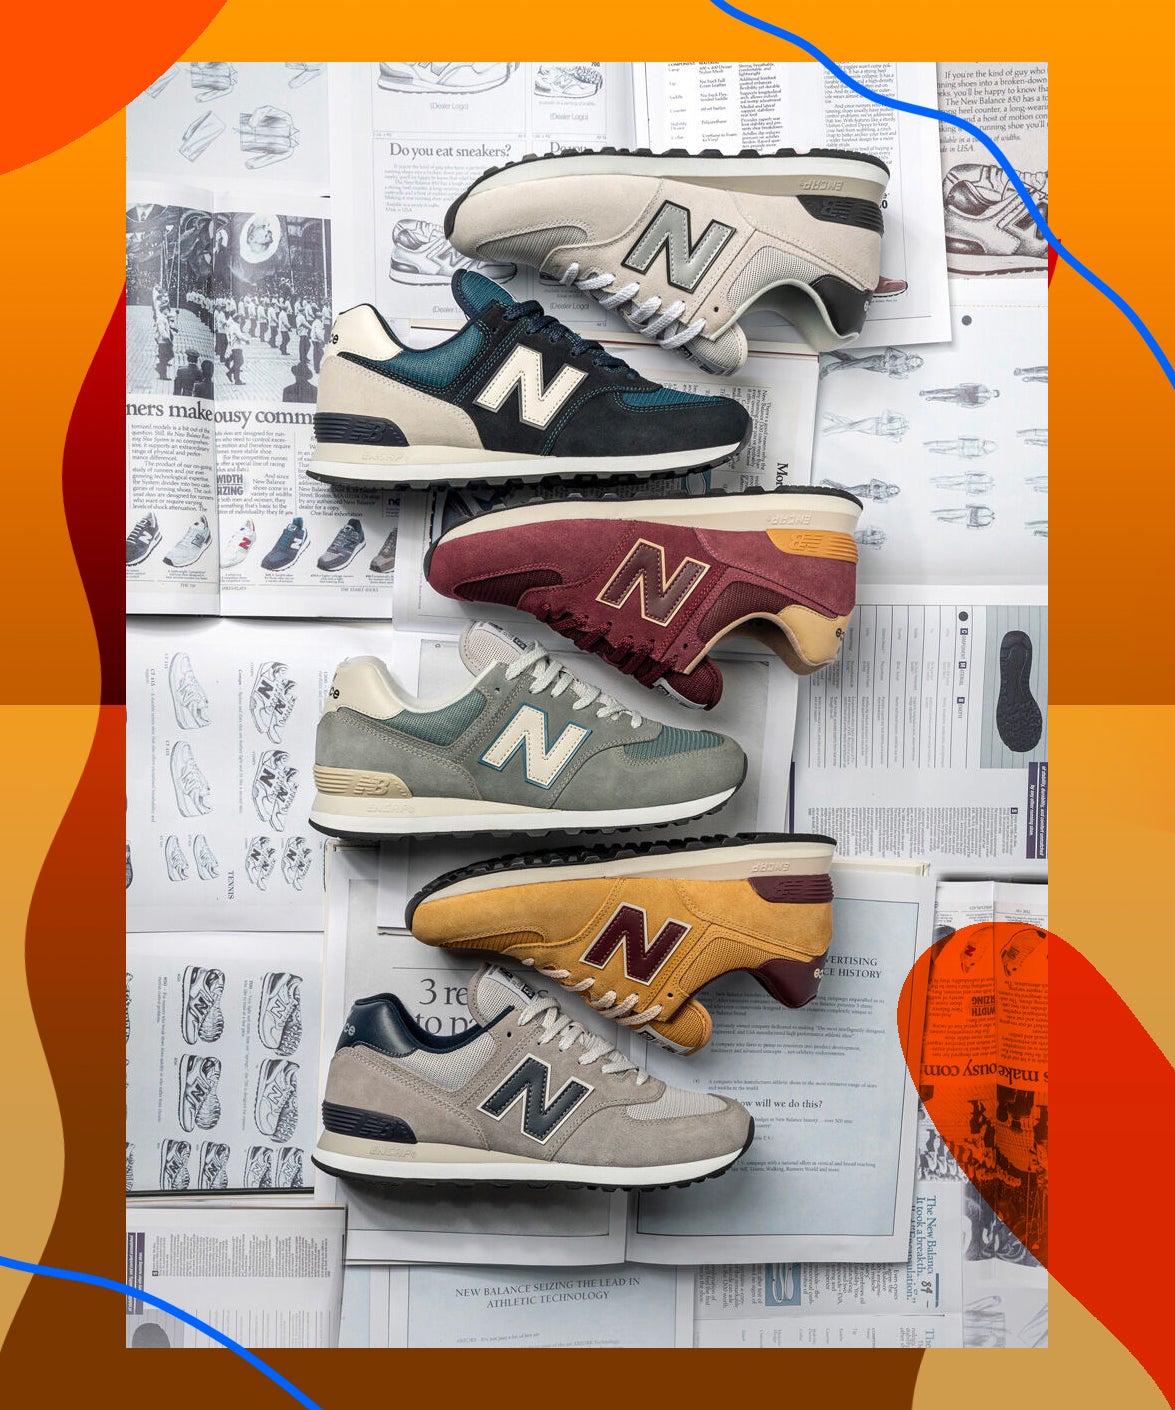 trstdly: sneakers news in simple english